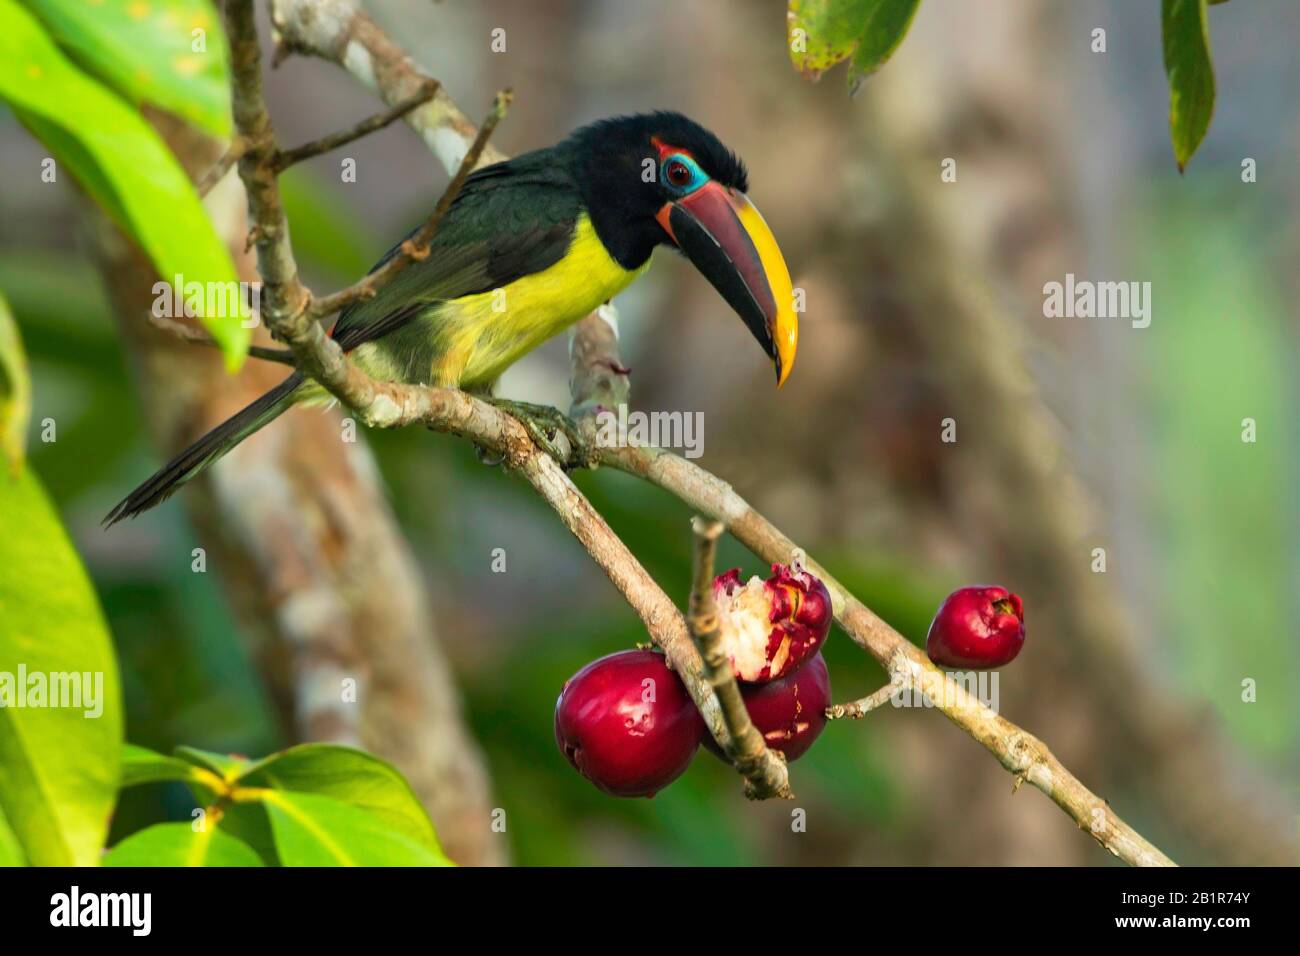 green aracari (Pteroglossus viridis), is one of the smallest members of the toucan family., Guyana Stock Photo